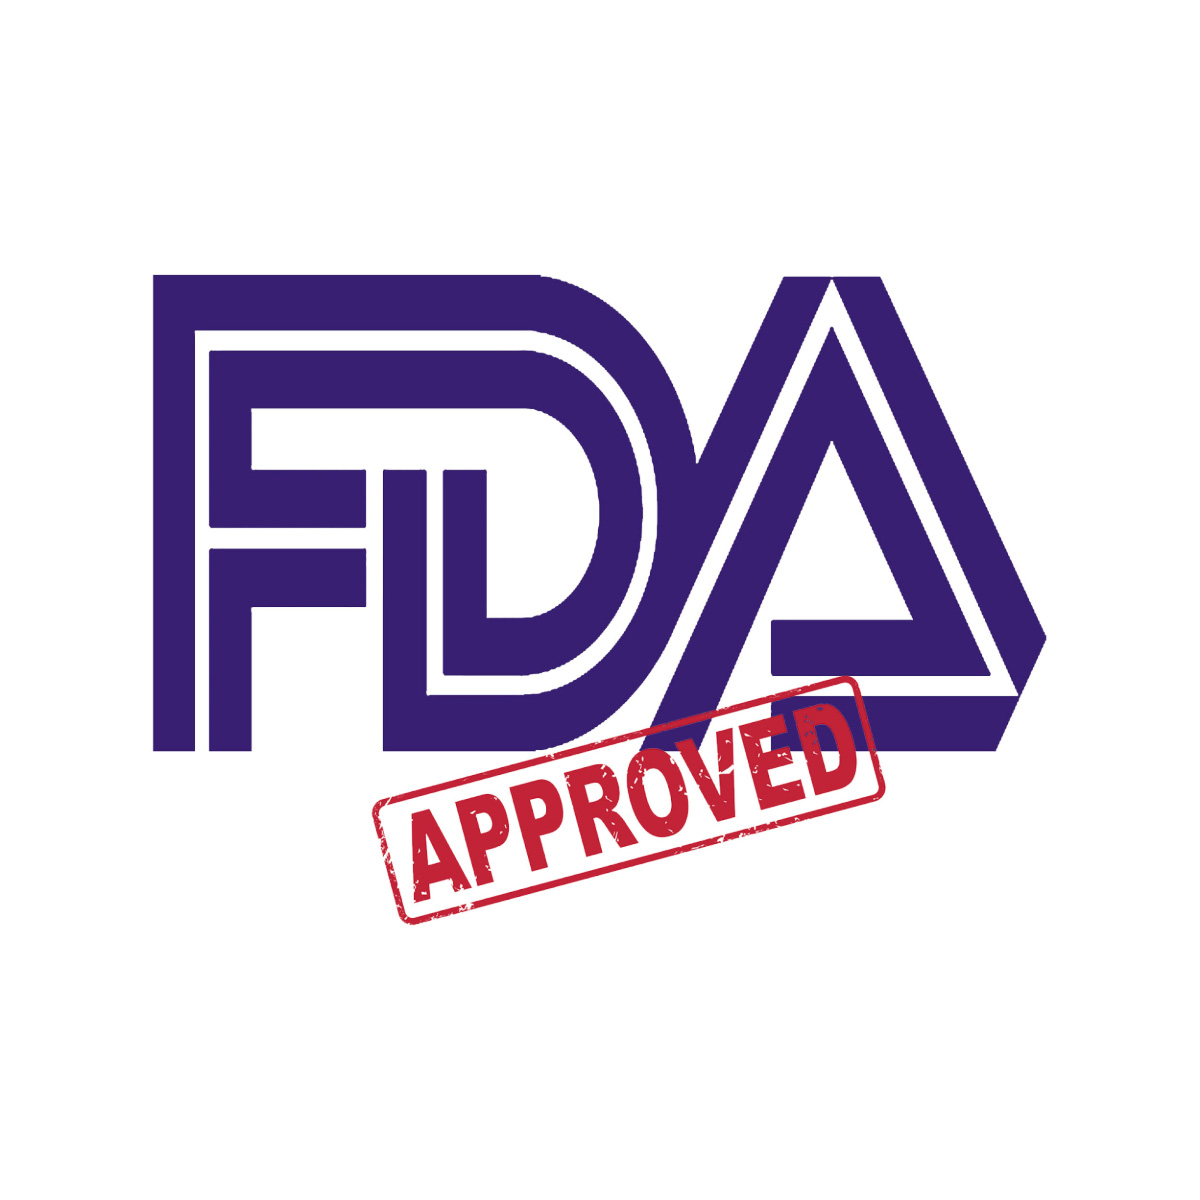 FDA Approved Amgen's BLINCYTO® (blinatumomab) for Patients One Month or Older With CD19-Positive Philadelphia Chromosome-Negative B-ALL in the Consolidation Phase, Regardless of MRD Status